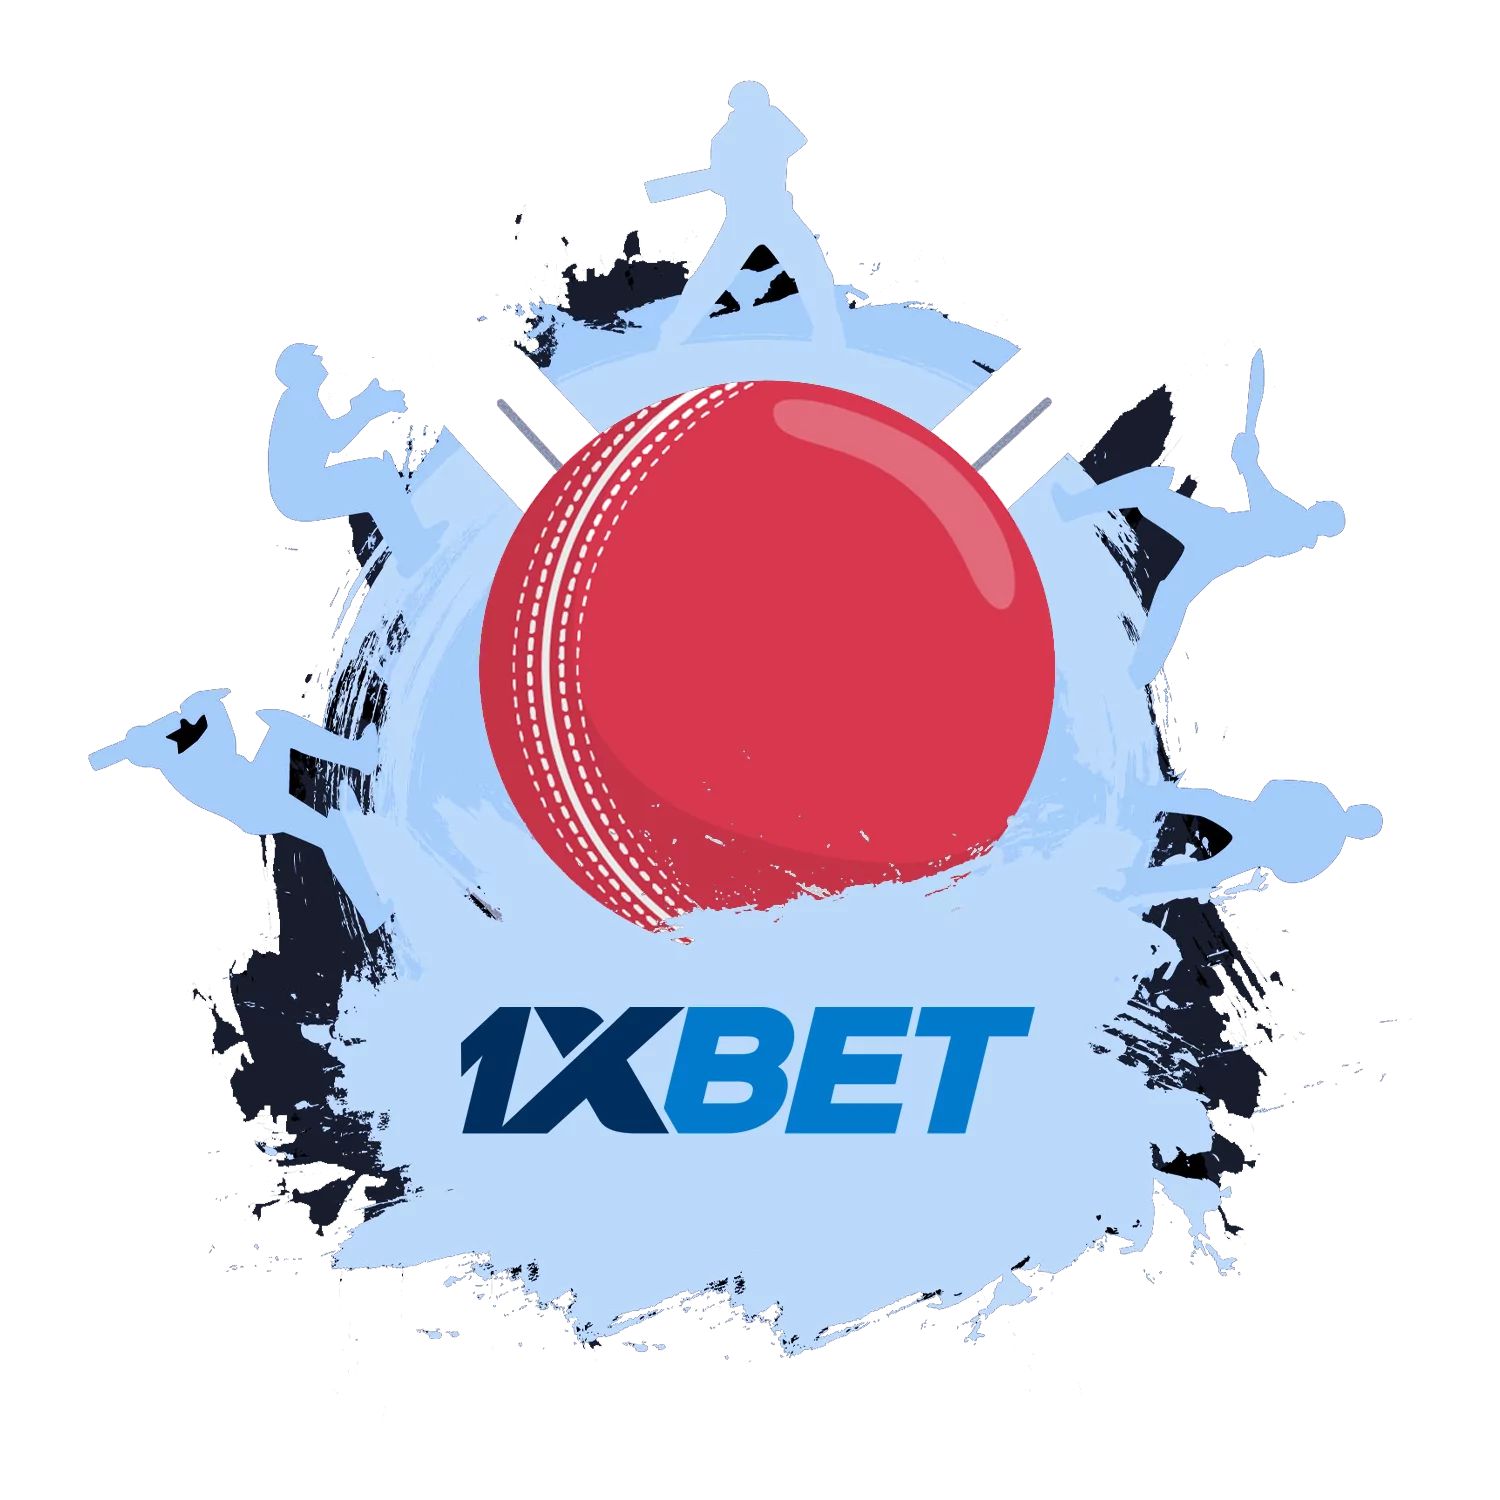 1xBet is a great place for sports betting, online casino games in India.